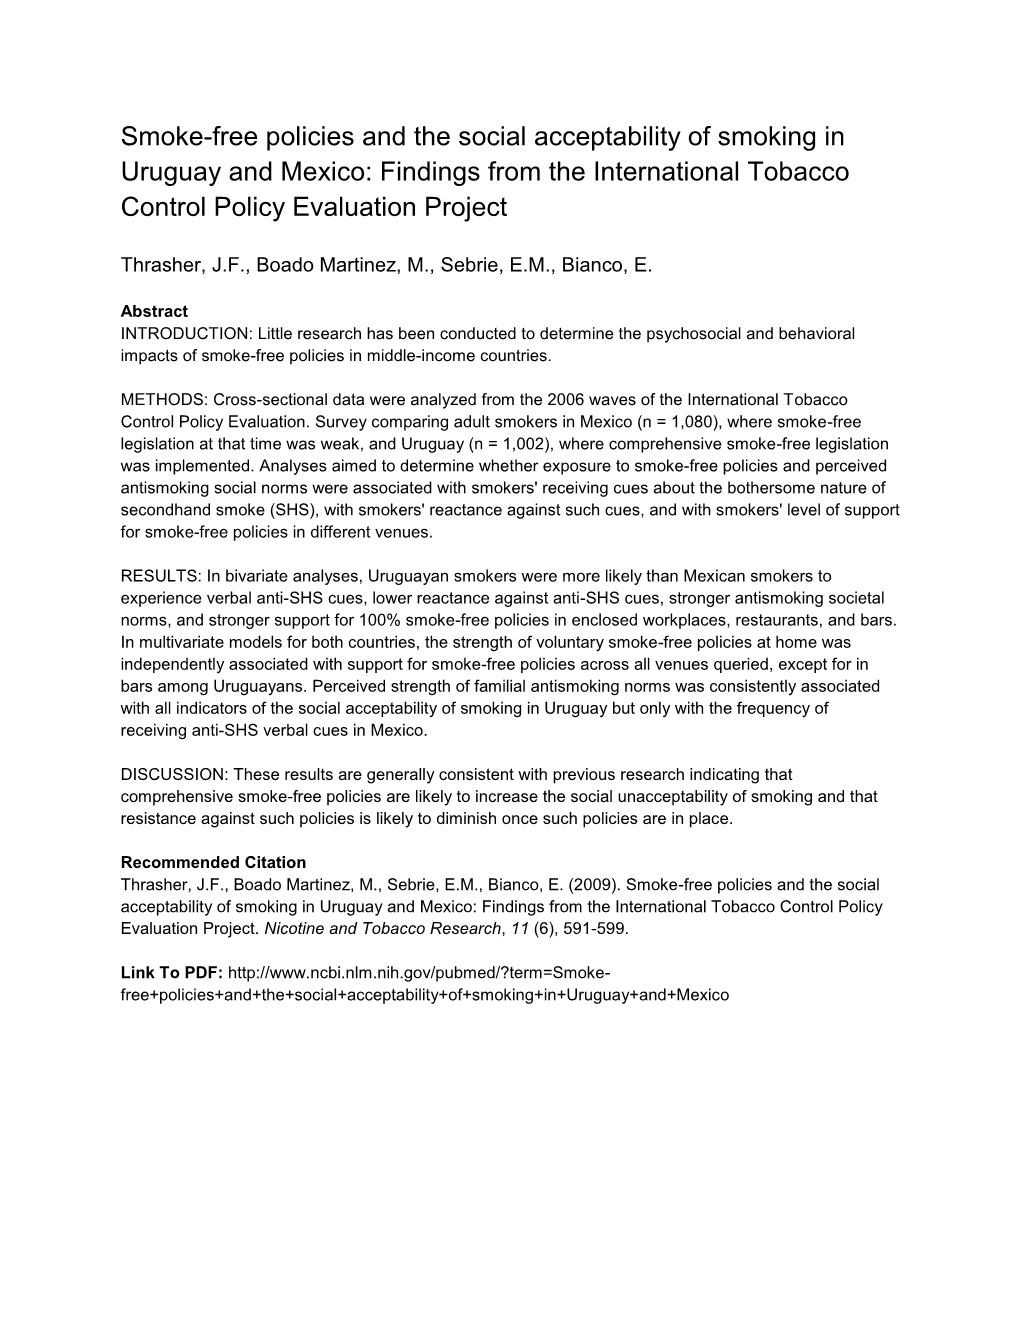 Smoke-Free Policies and the Social Acceptability of Smoking in Uruguay and Mexico: Findings from the International Tobacco Control Policy Evaluation Project